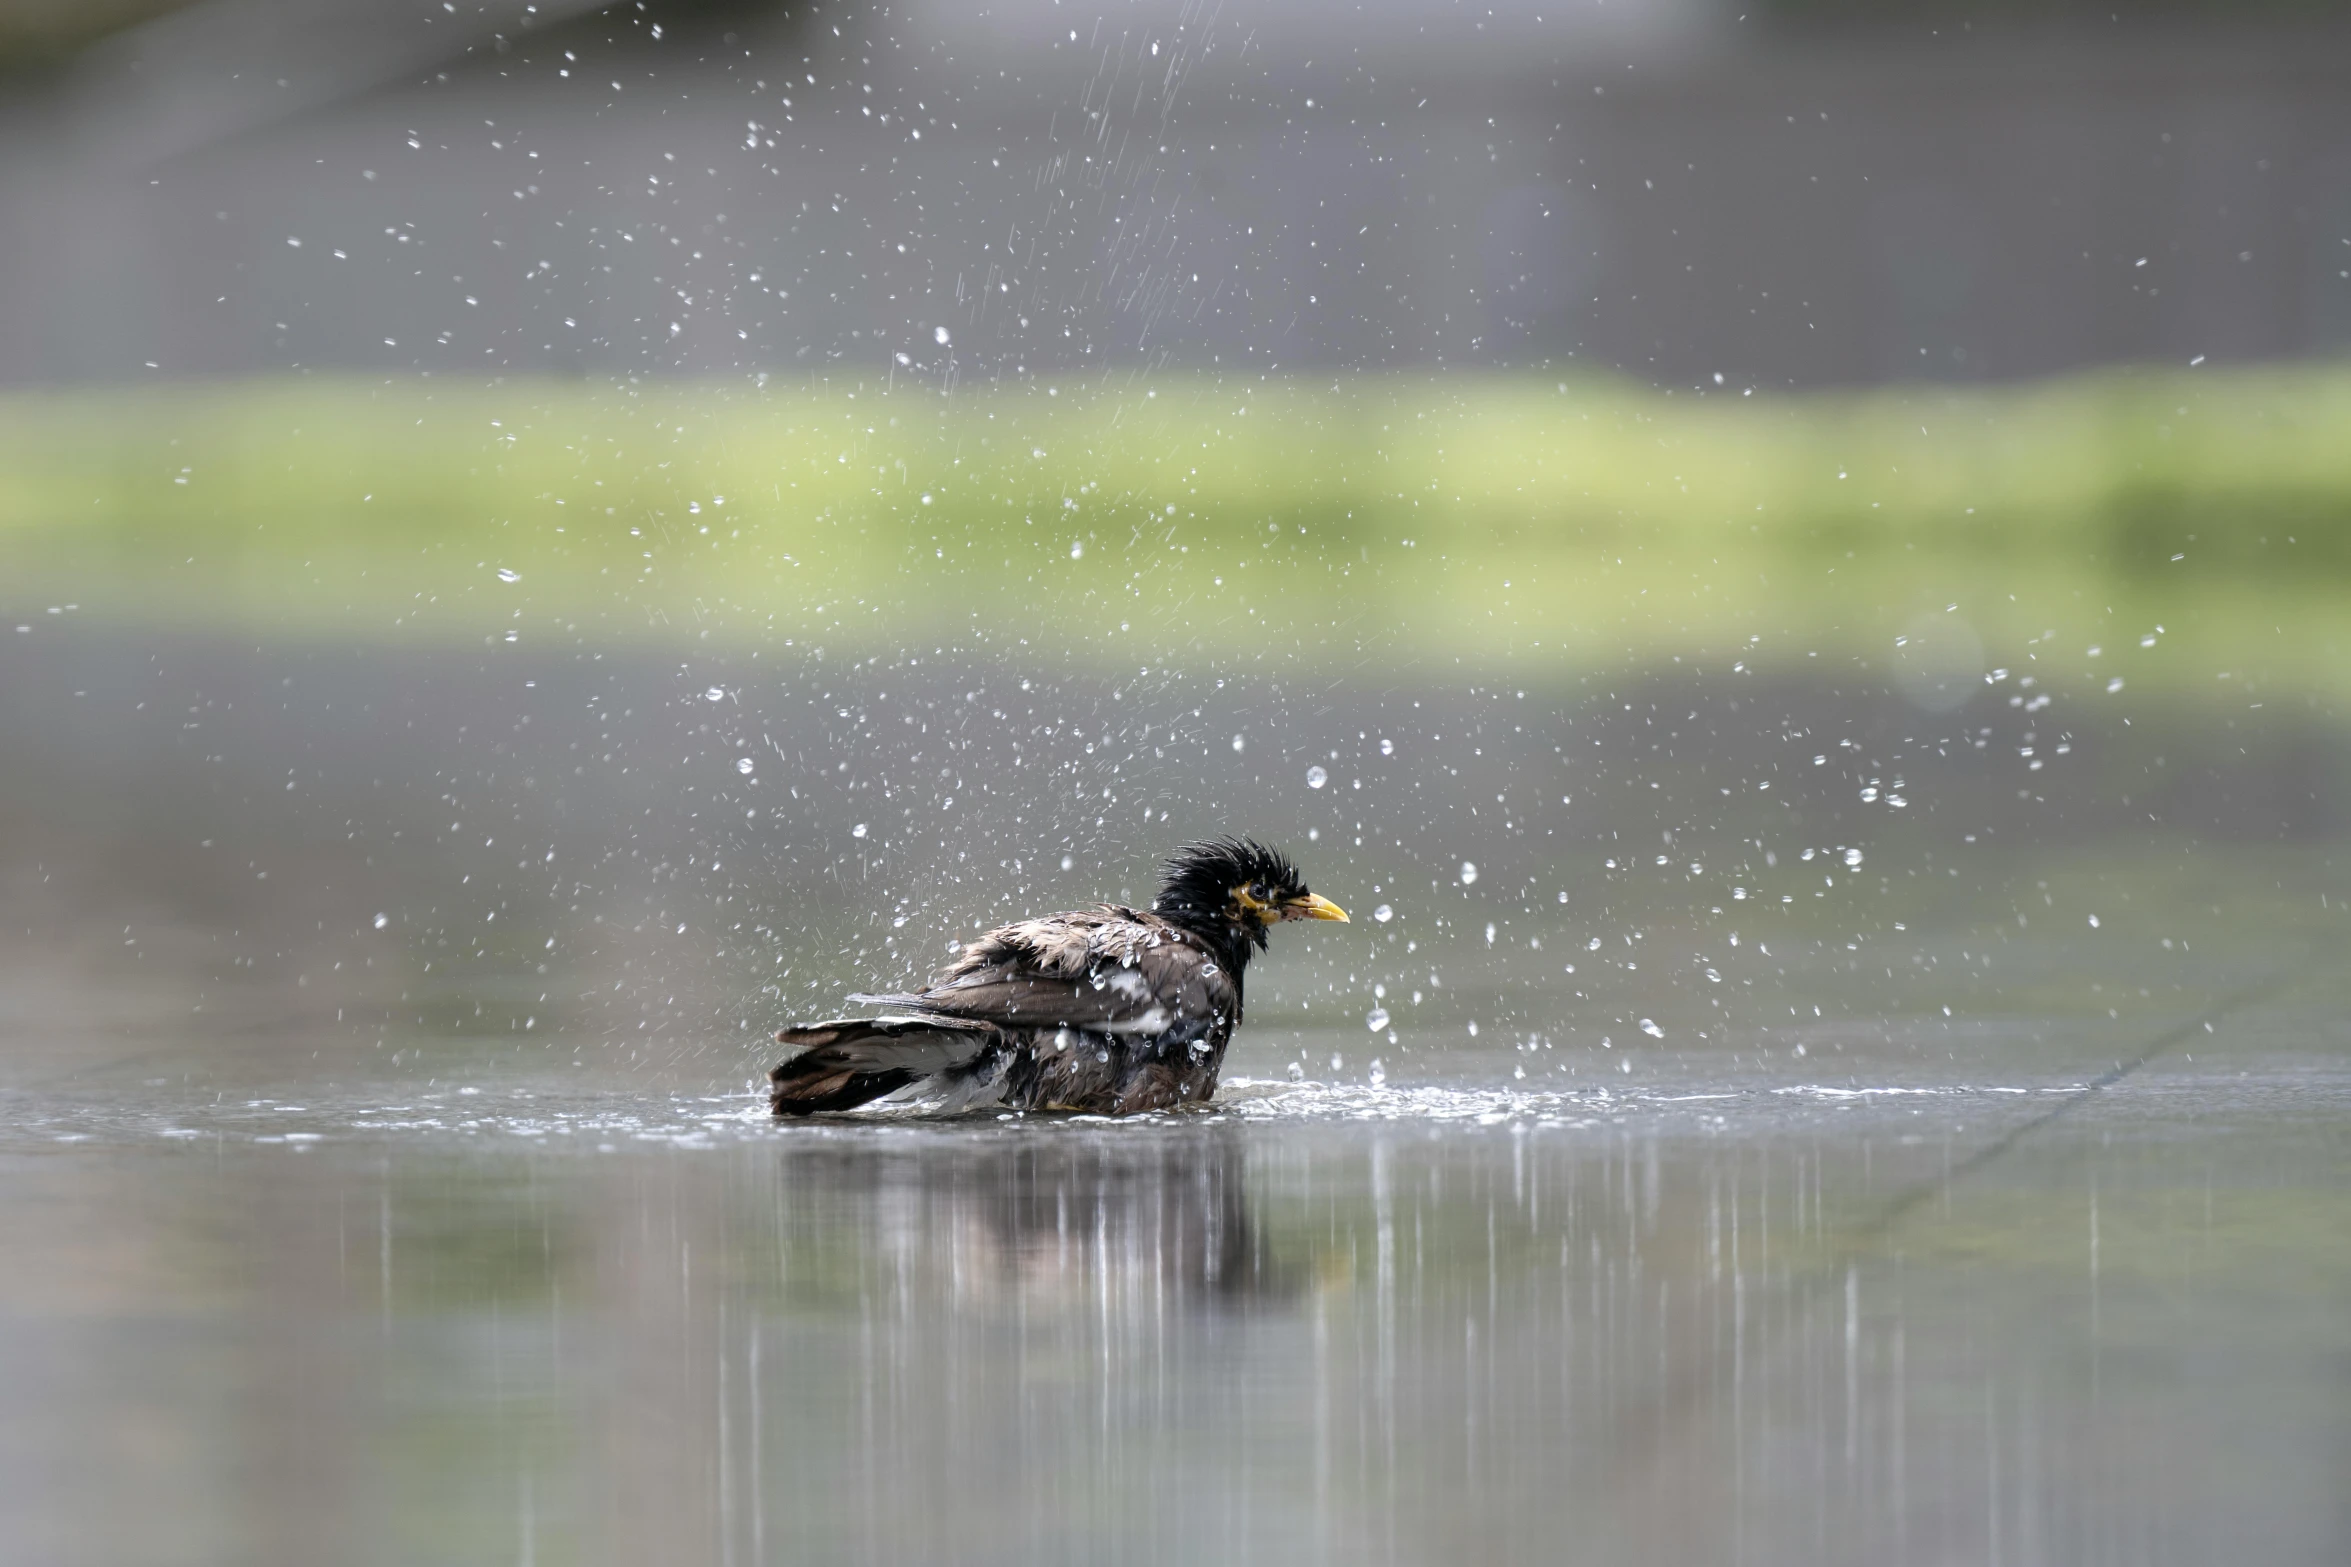 a close up view of a duck in the water with a drop of rain falling